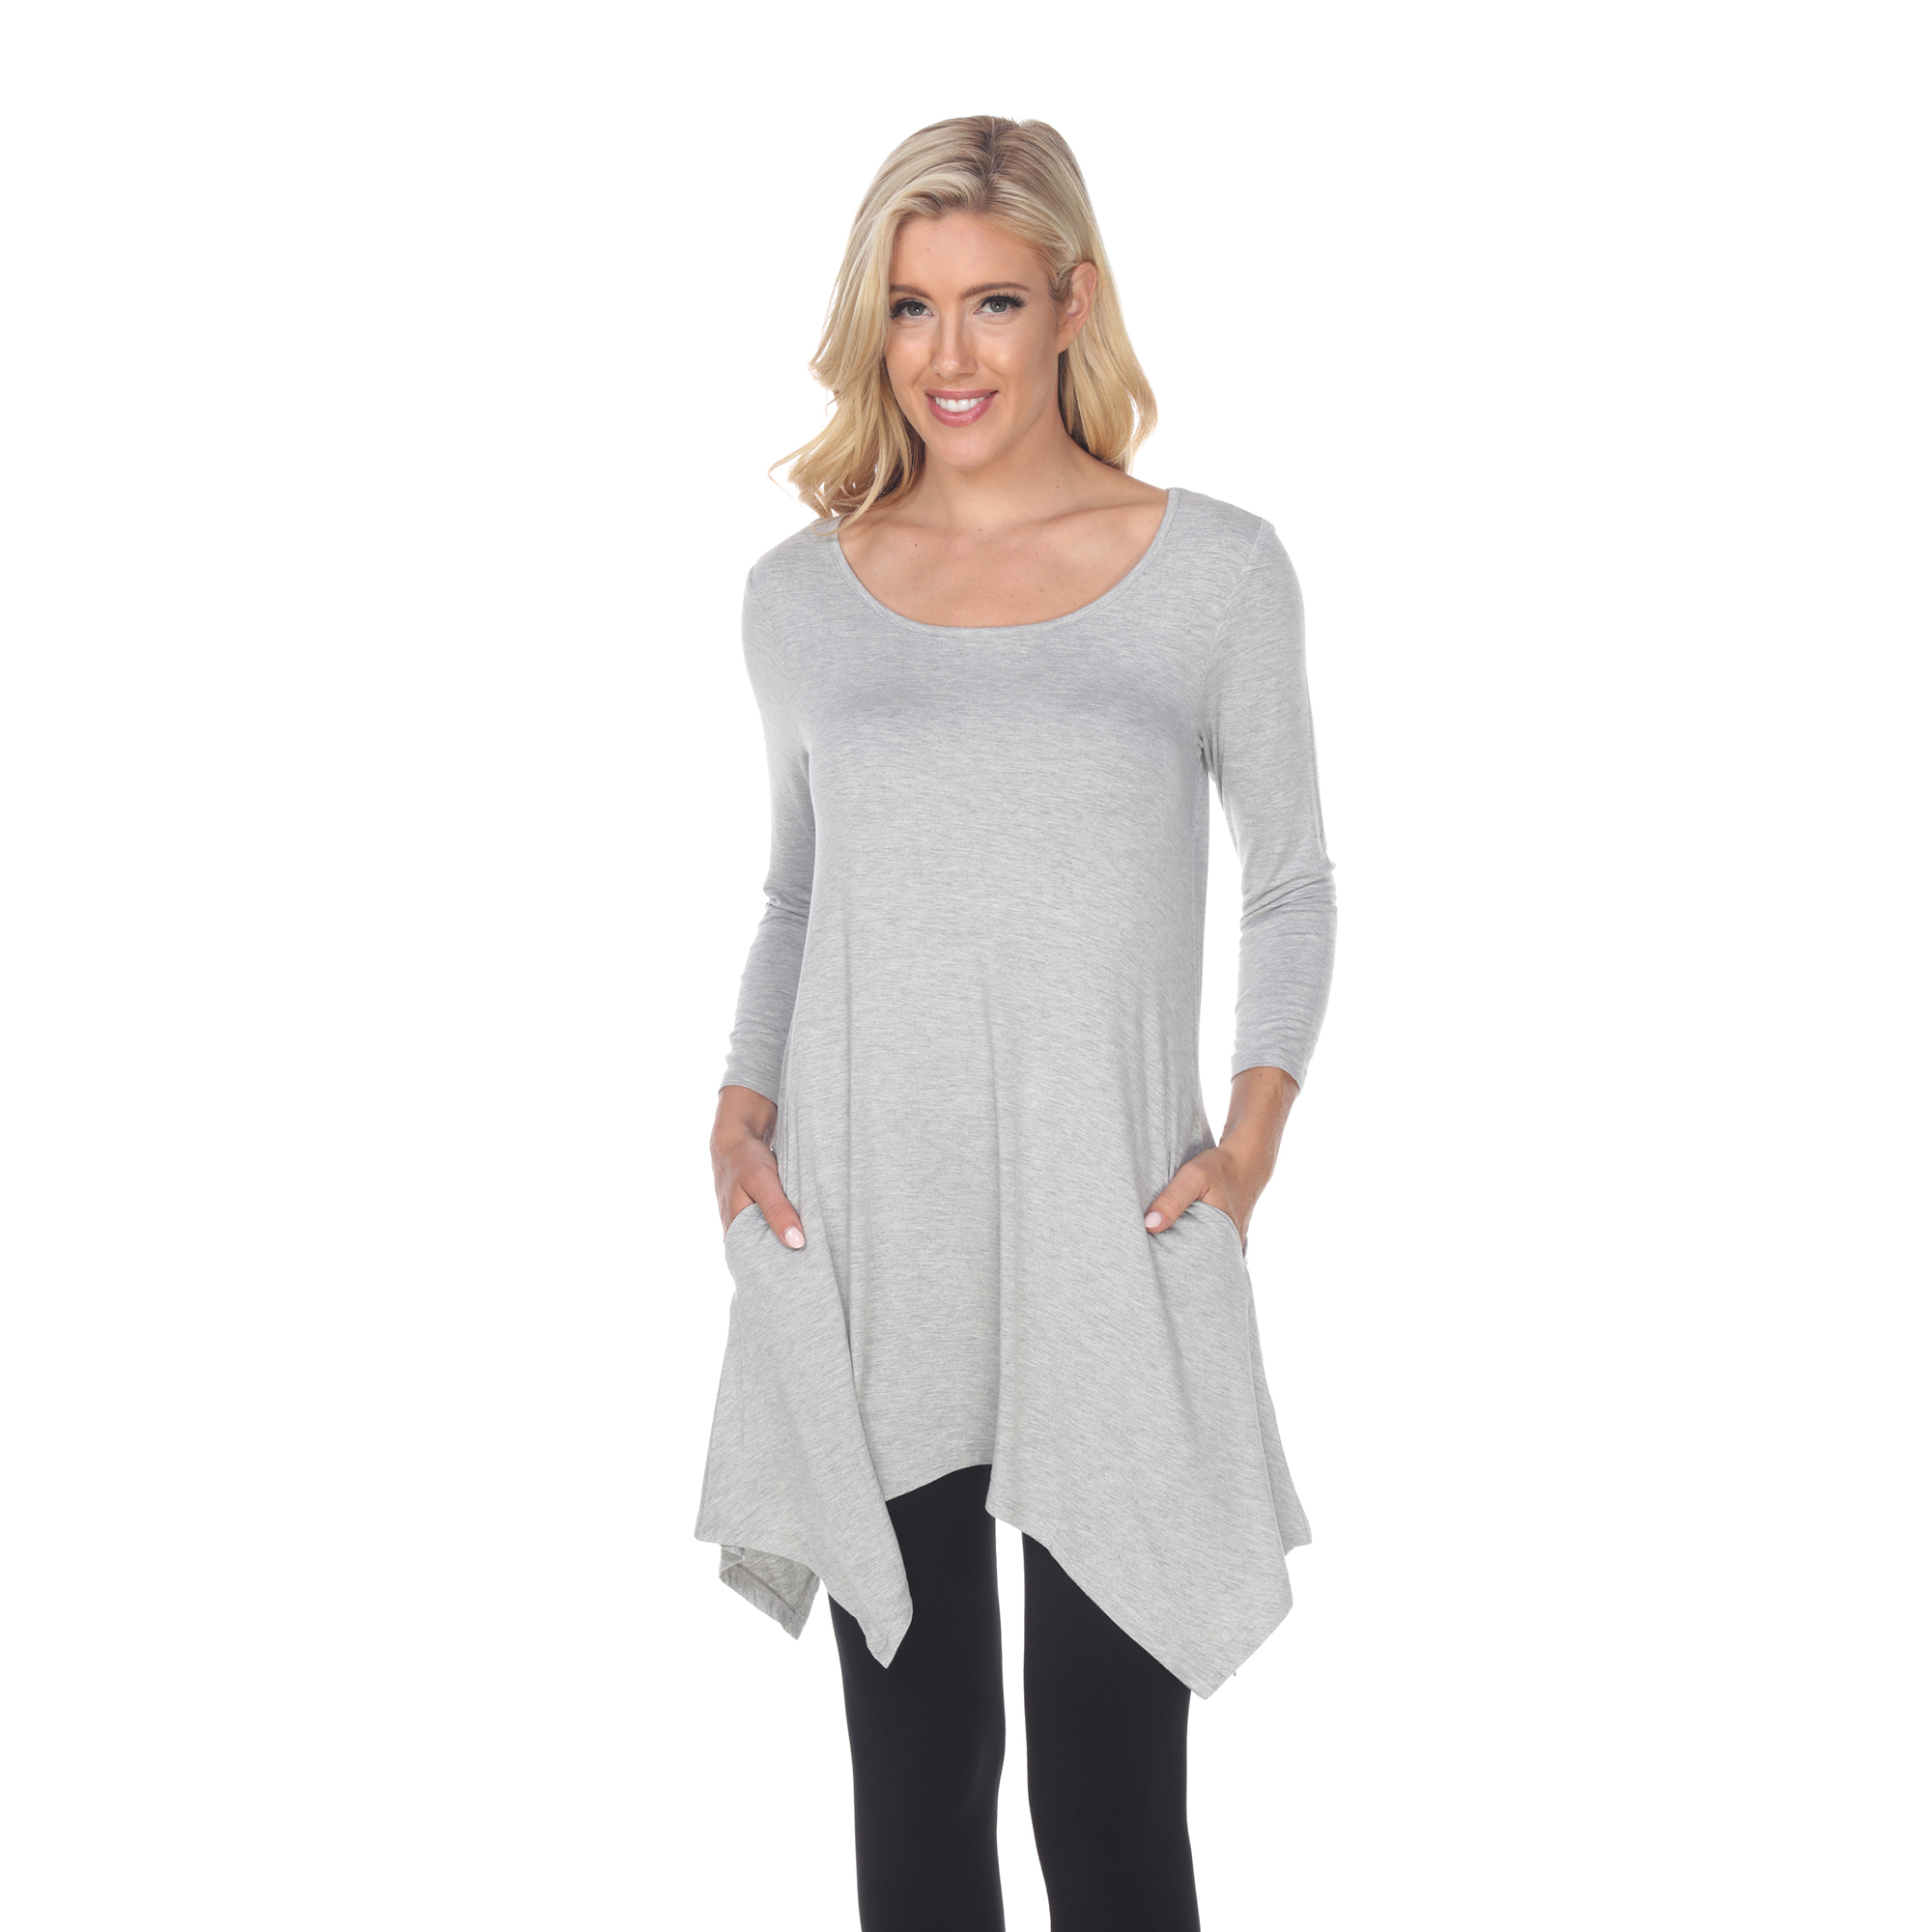 White Mark Women's Quarter Sleeve Tunic Top With Pockets - Heather Grey, 3X